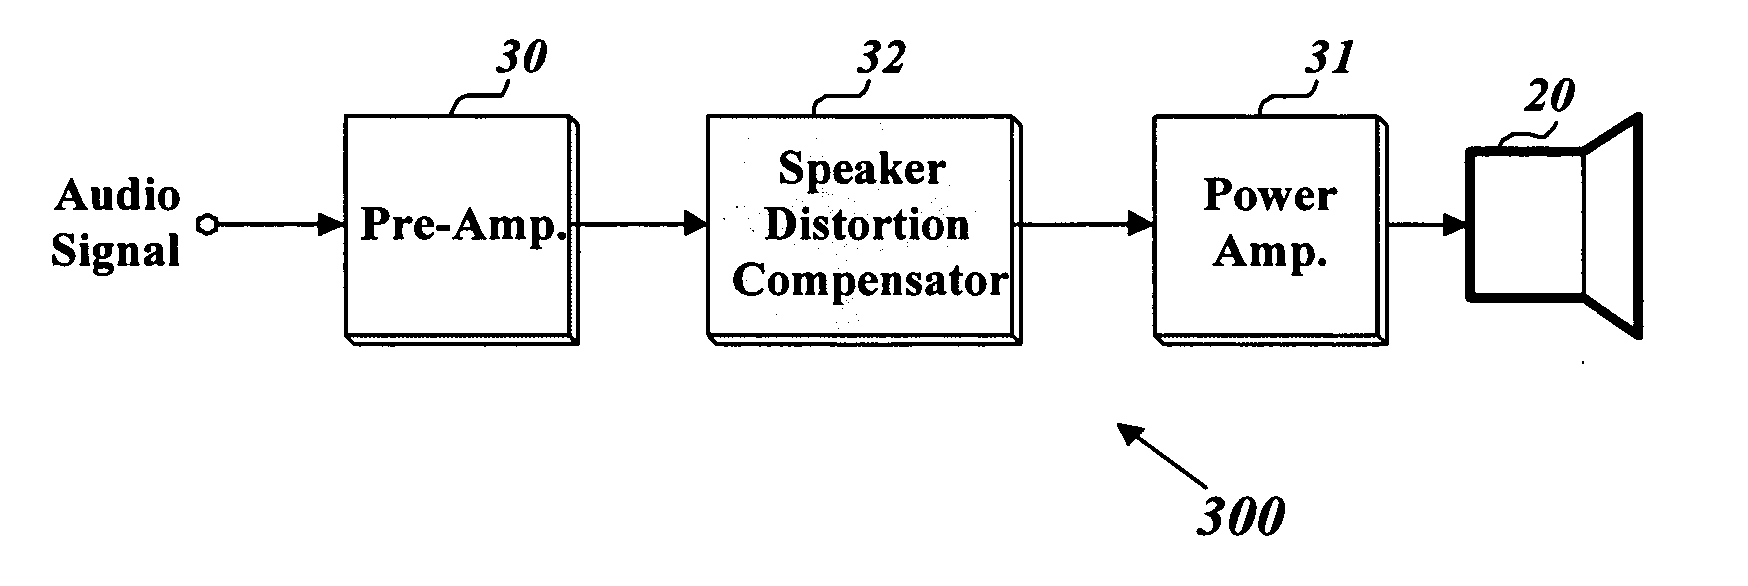 Method and apparatus of compensating for speaker distortion in an audio apparatus